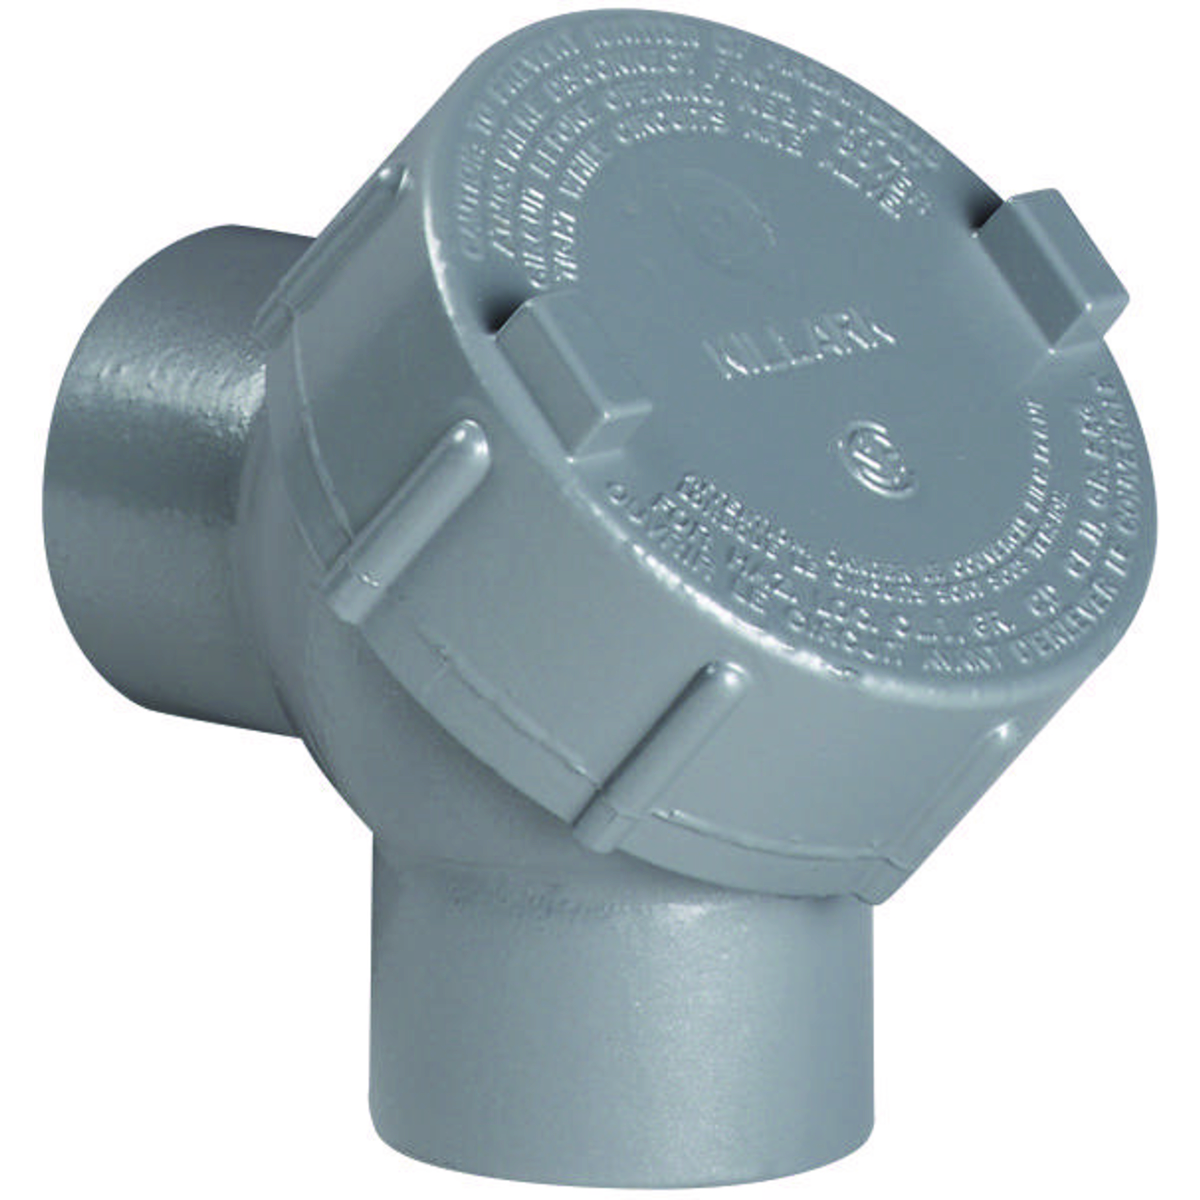 Y SERIES - ALUMINUM ATEX AND IECEX CERTIFIED 90-DEGREE CAPPED ELBOW -FEMALE/FEMALE - HUB SIZE 1-1/2 INCH